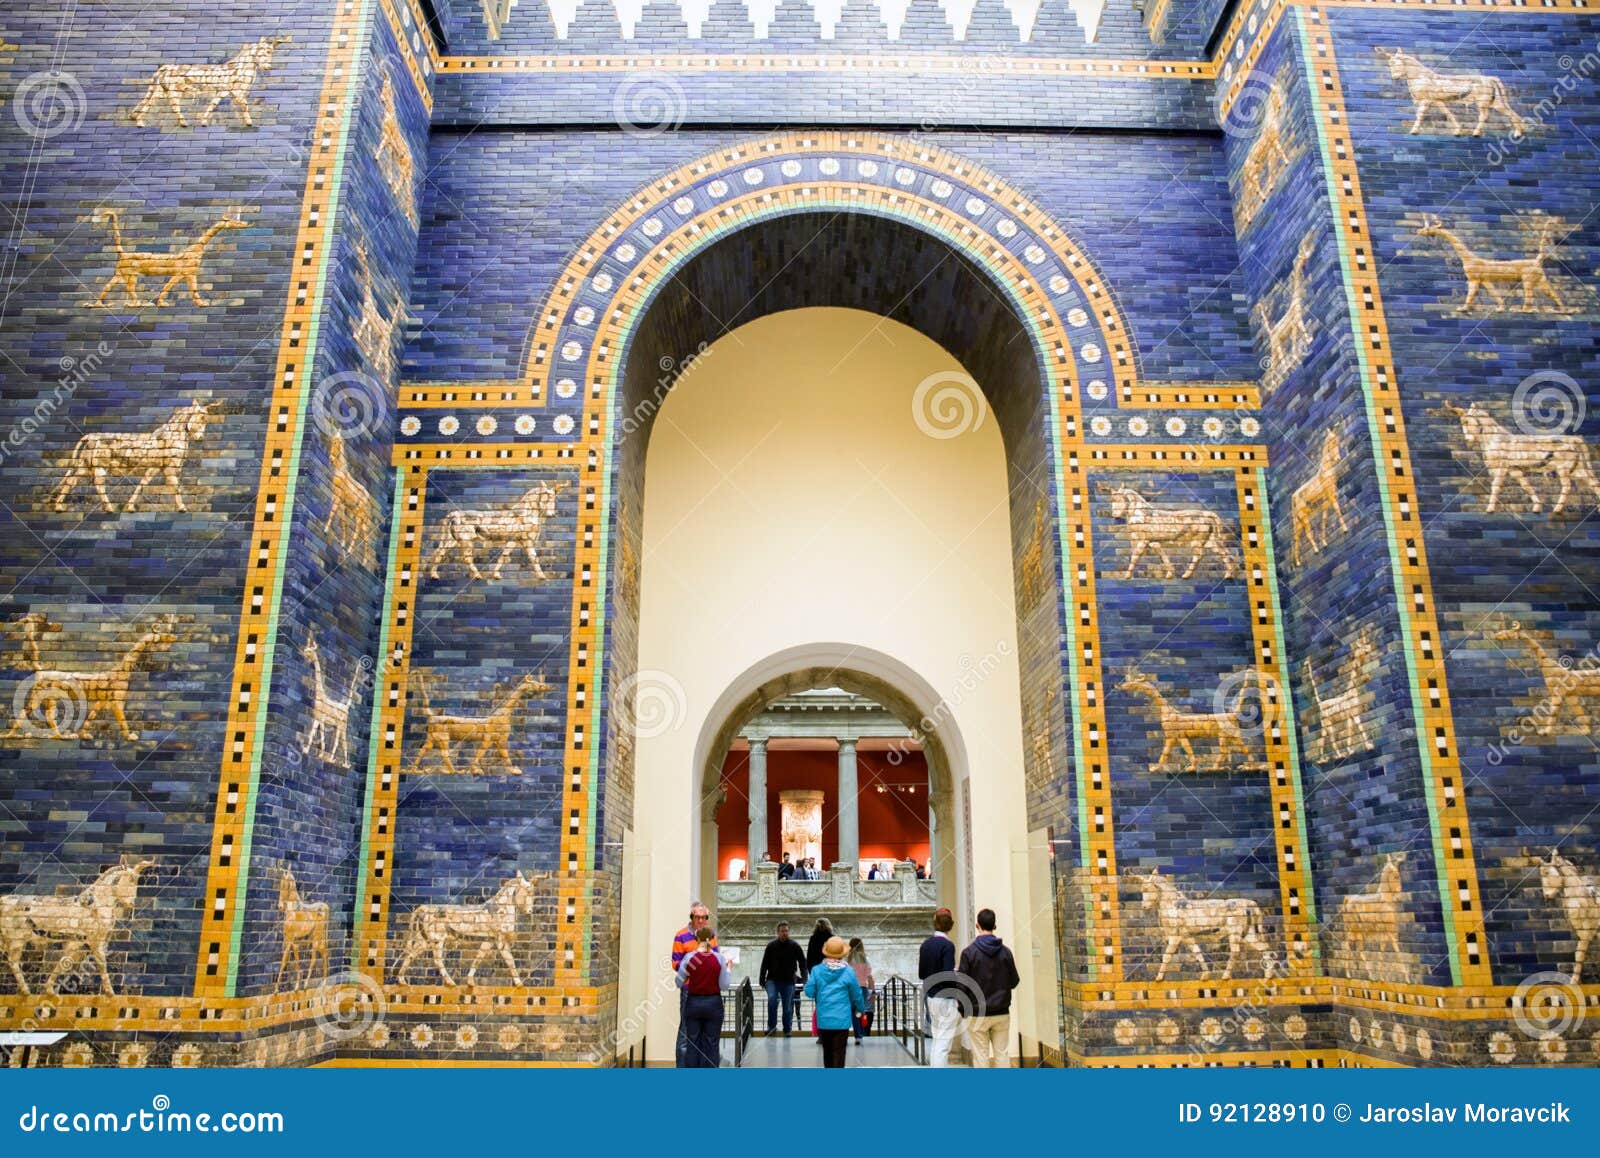 Ishtar Gate From Babylon In Pergamon Museum Berlin Germany Editorial Image Image Of German Monument